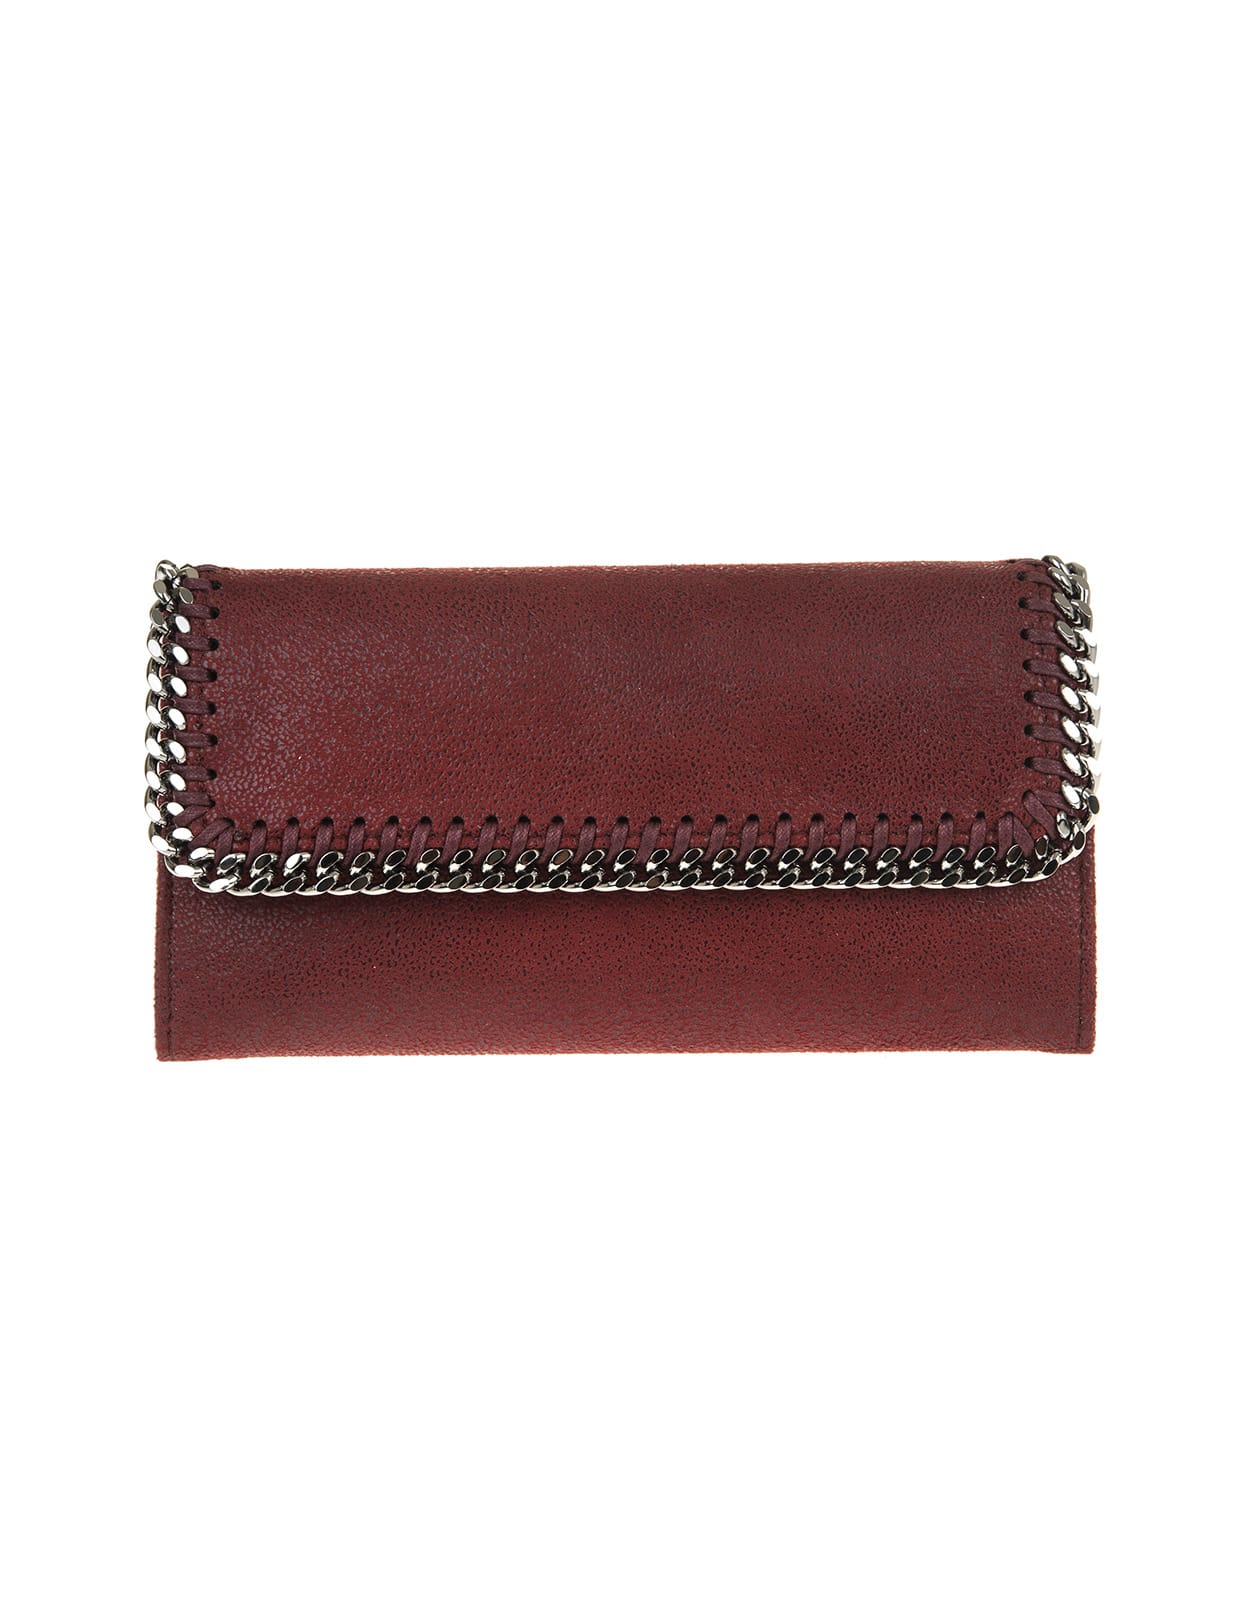 Stella McCartney Wine Red And Silver Continental Falabella Wallet